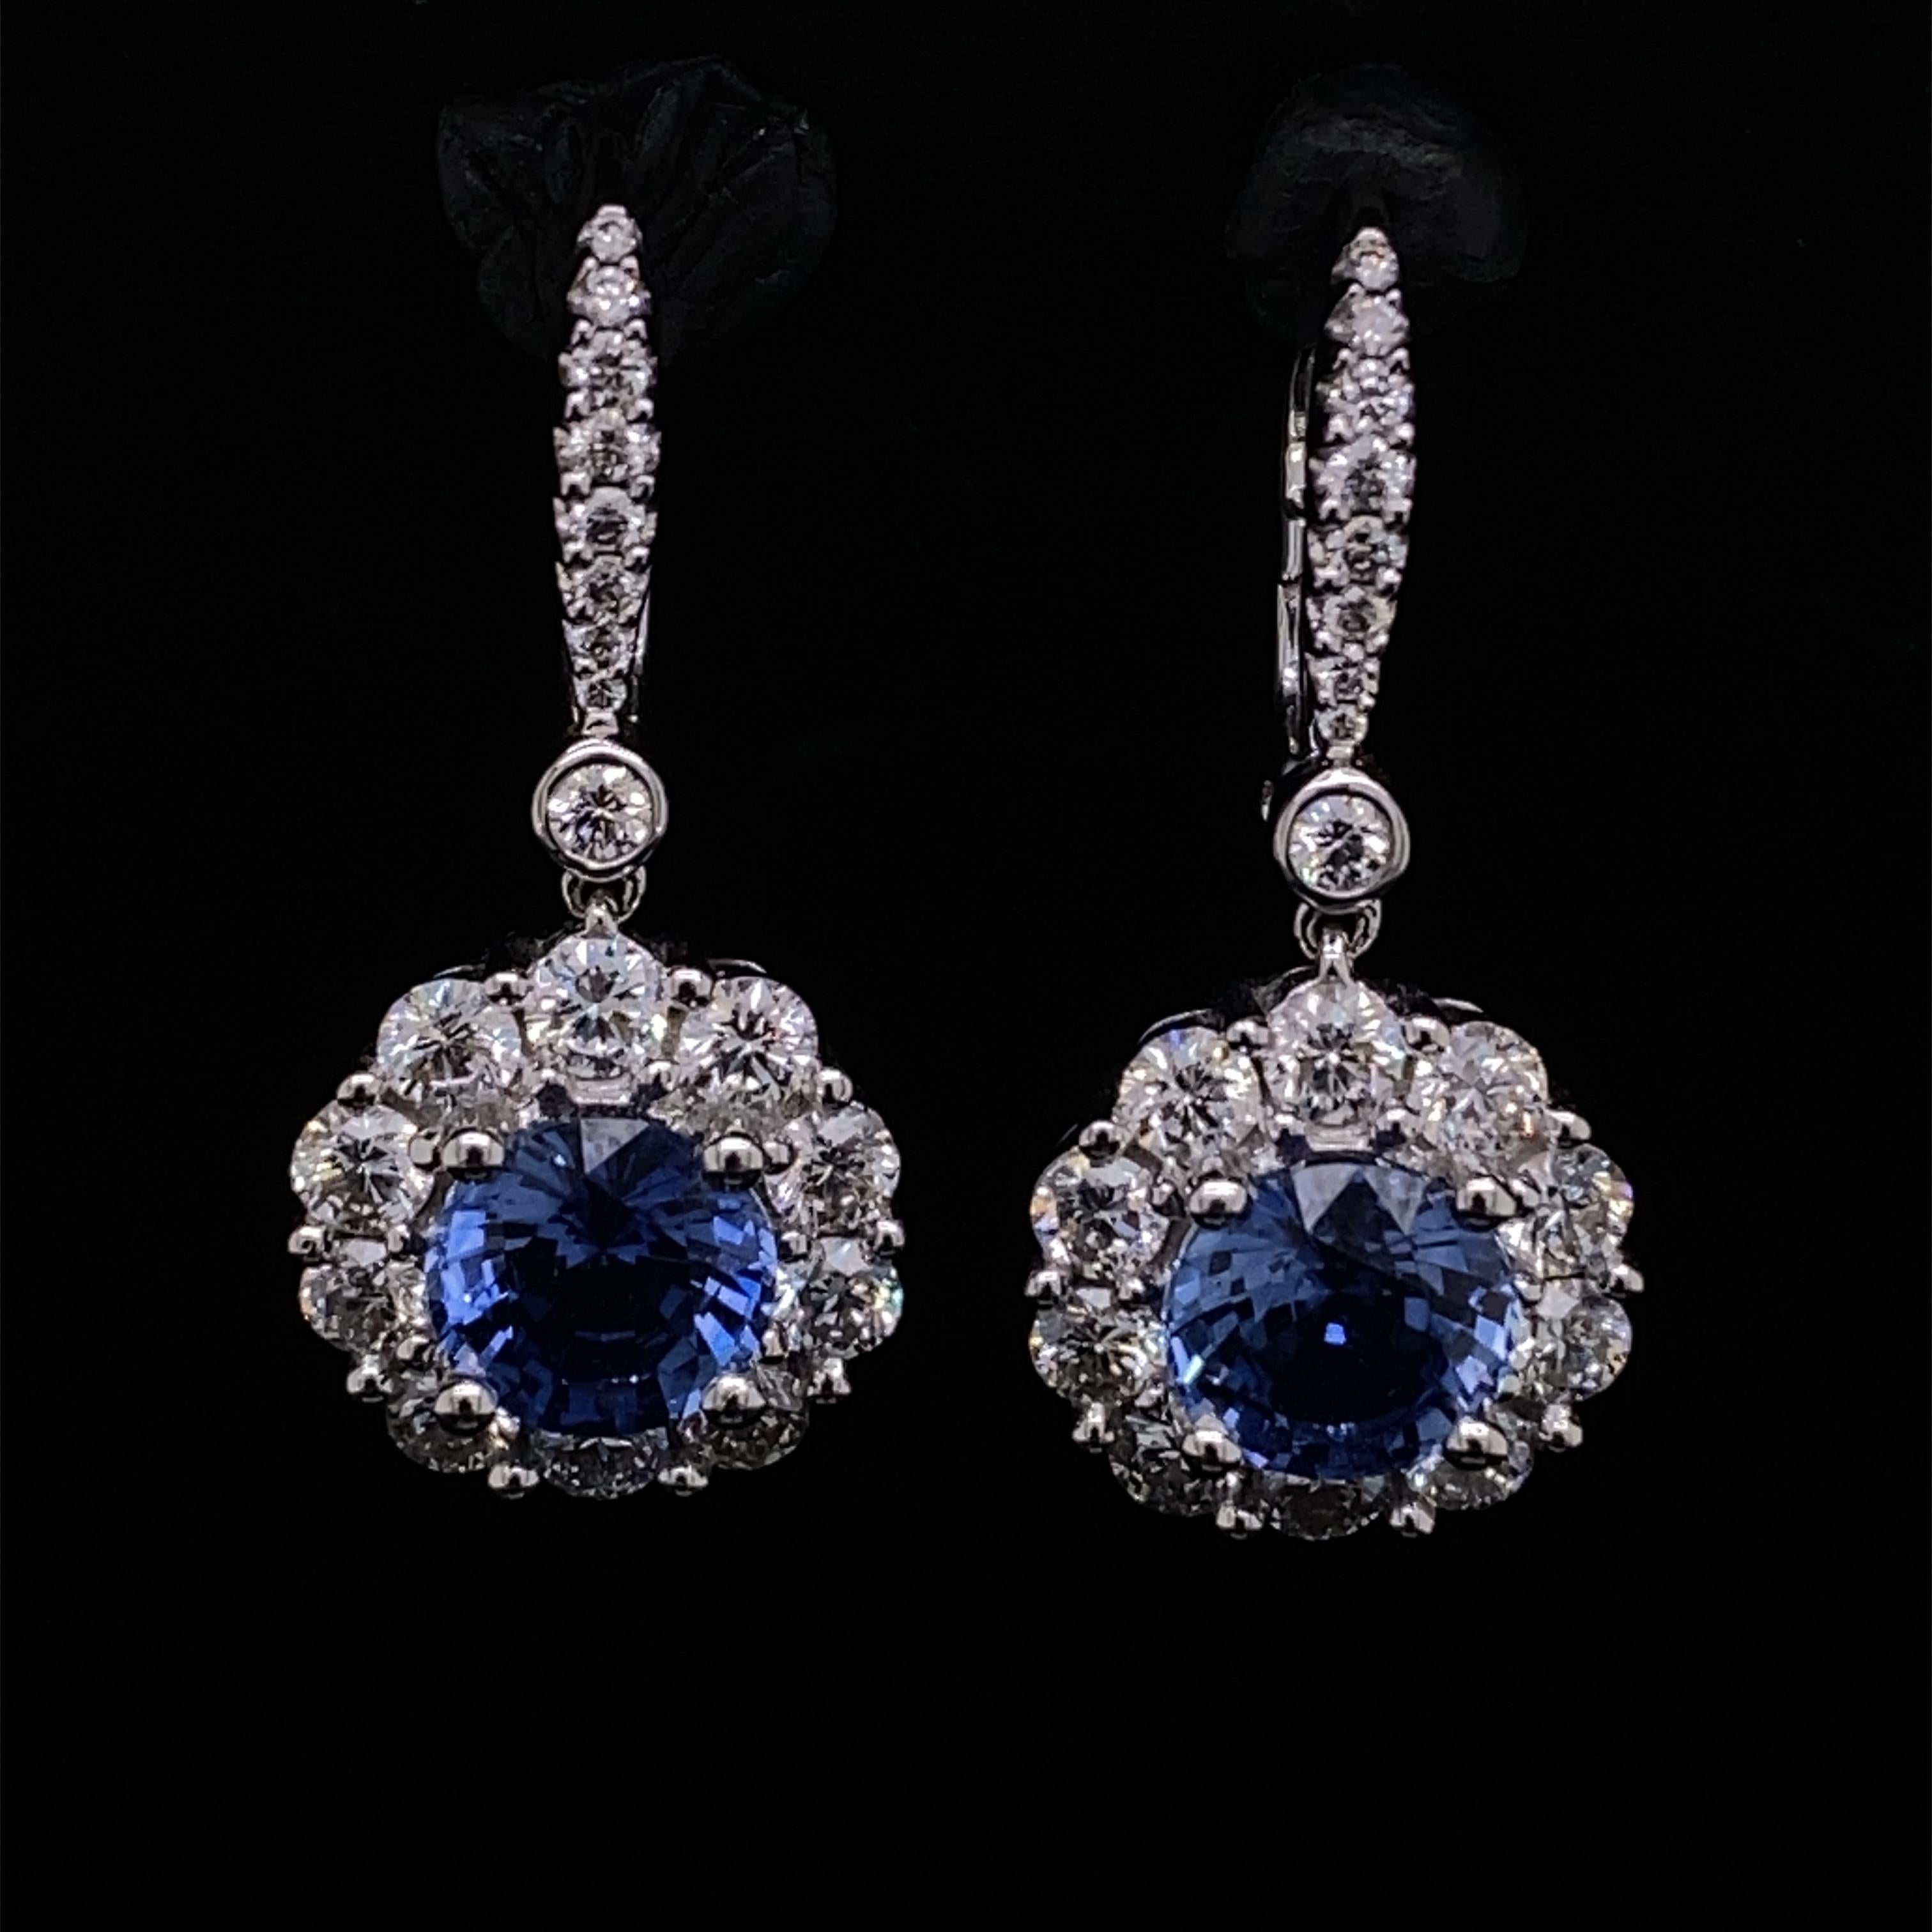 A pair of sapphire and diamond cluster drop earrings set in 18 karat white gold.

The beautiful earring cluster drops are suspended from diamond line drops, each formed as a central round cut sapphire within a diamond cluster, made up of round